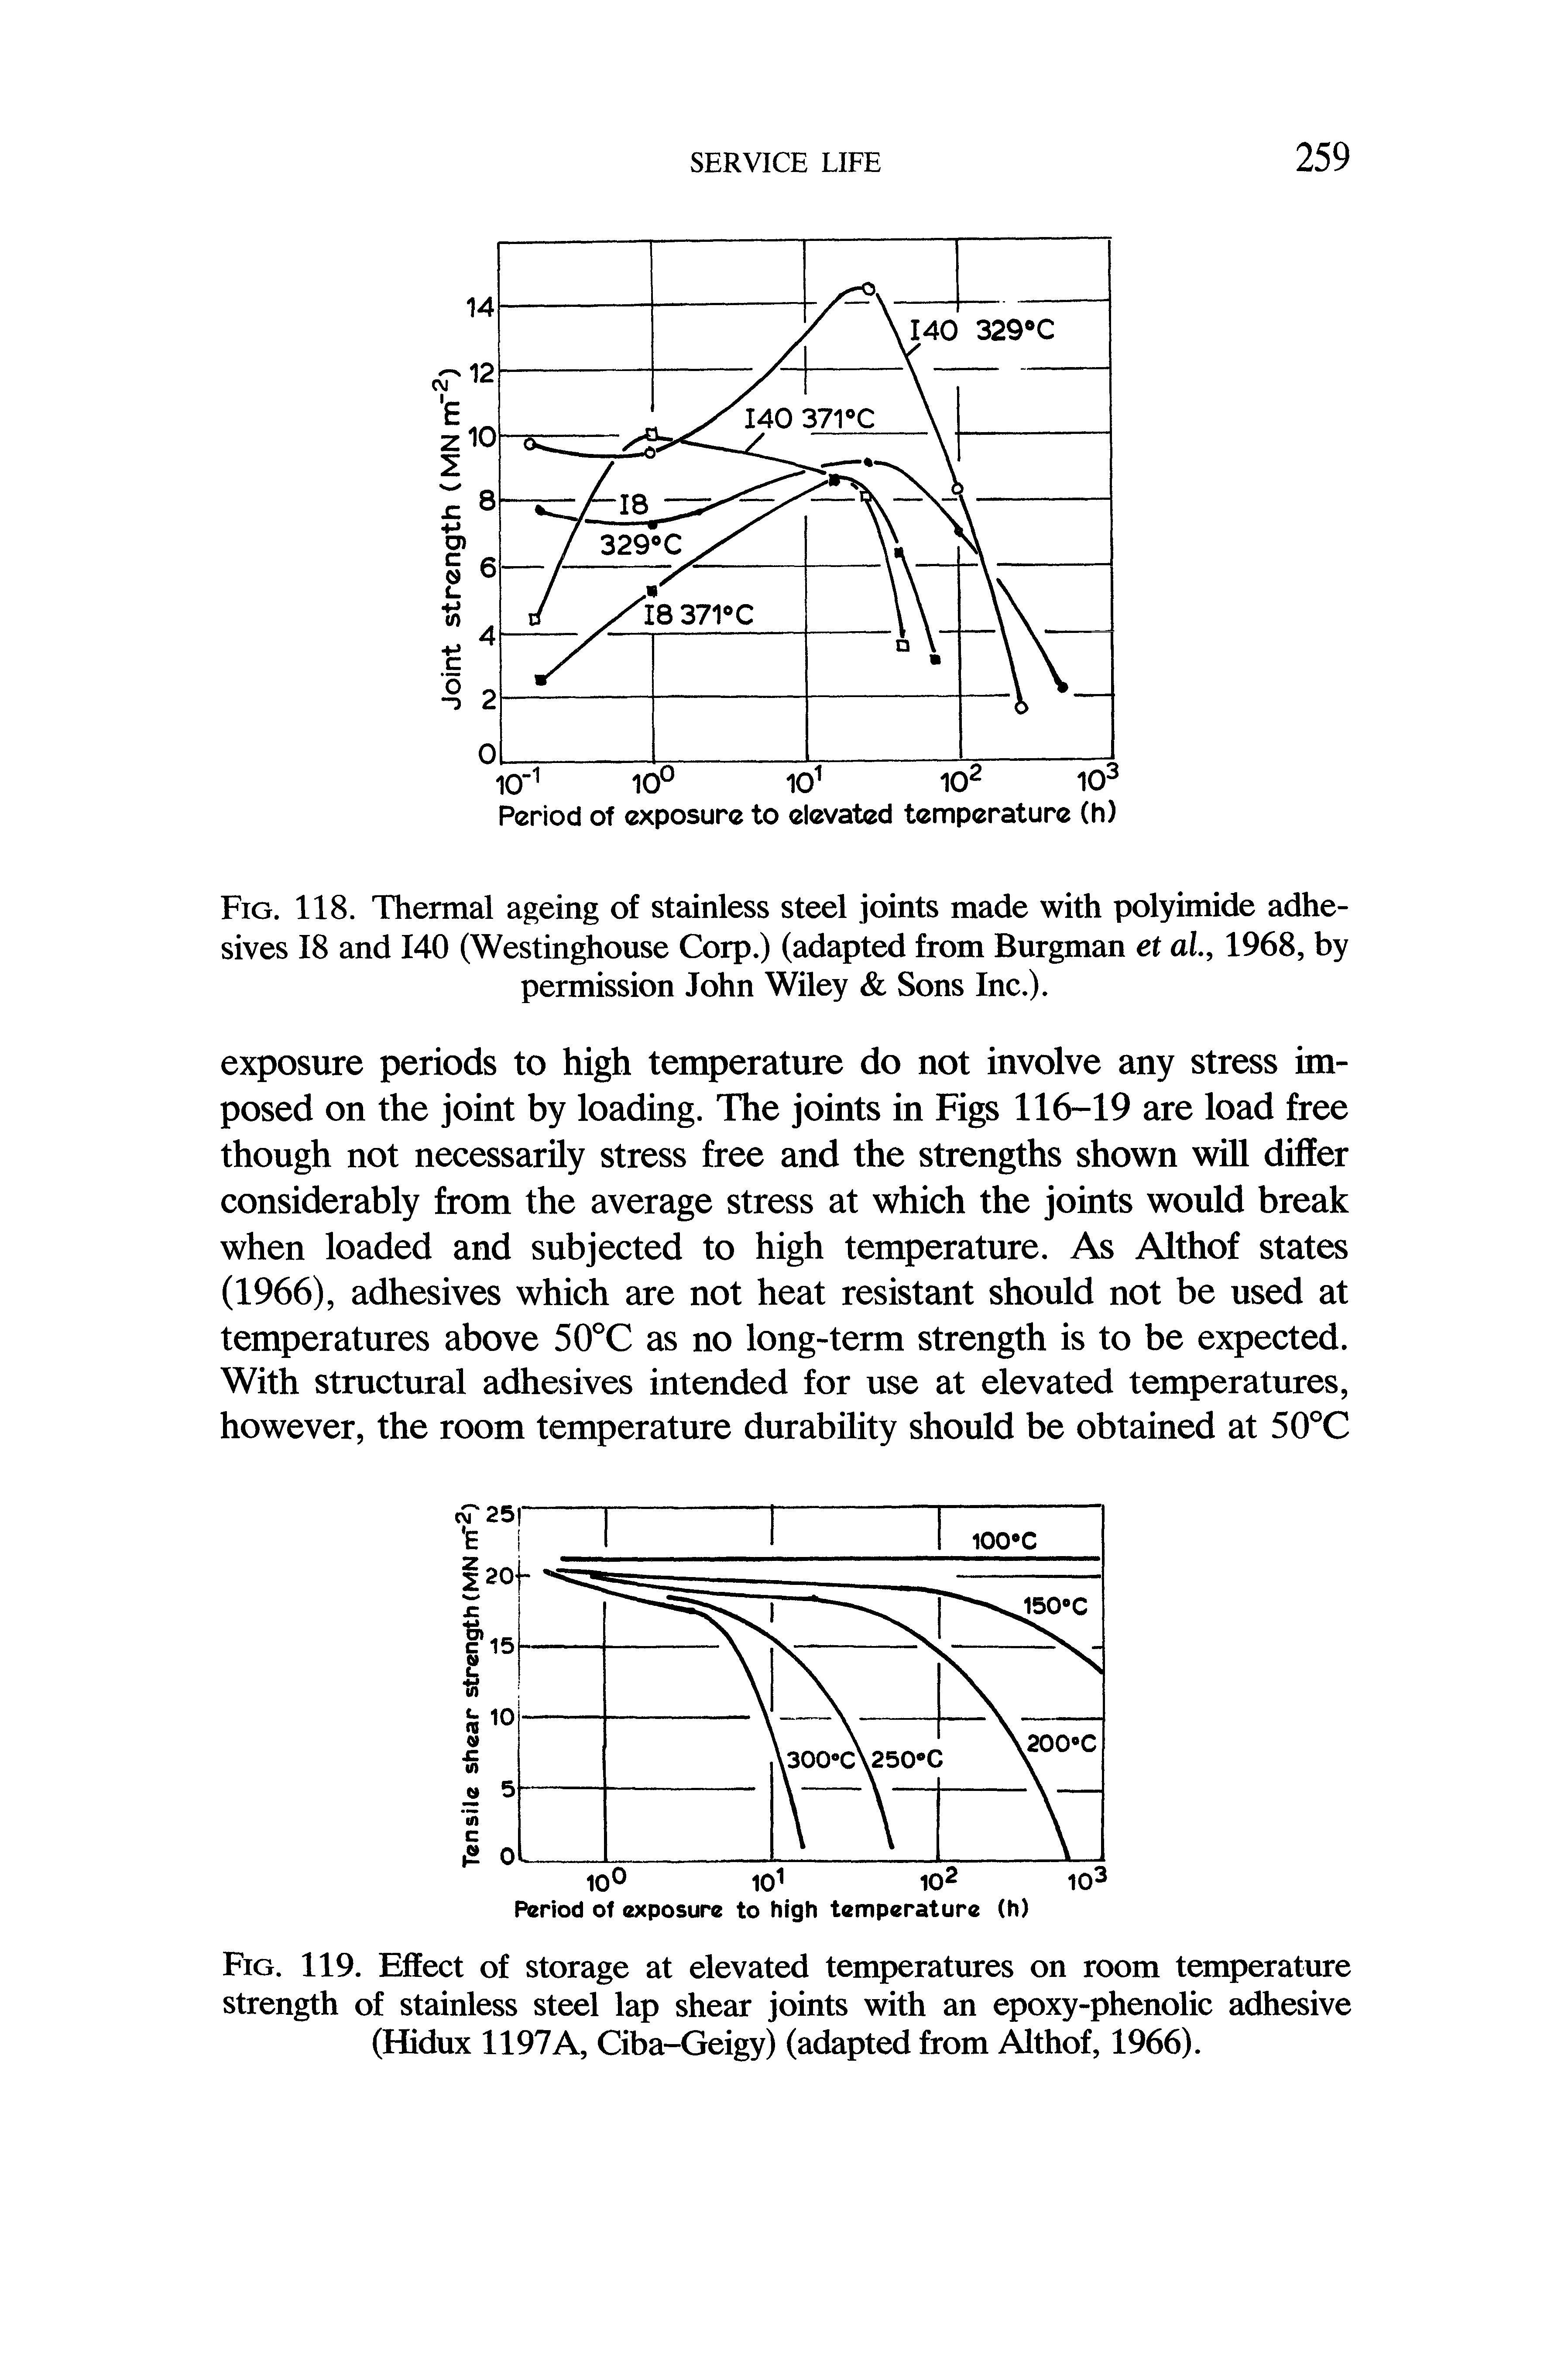 Fig. 118. Thermal ageing of stainless steel joints made with polyimide adhesives 18 and 140 (Westinghouse Corp.) (adapted from Burgman et al., 1968, by permission John Wiley Sons Inc.).